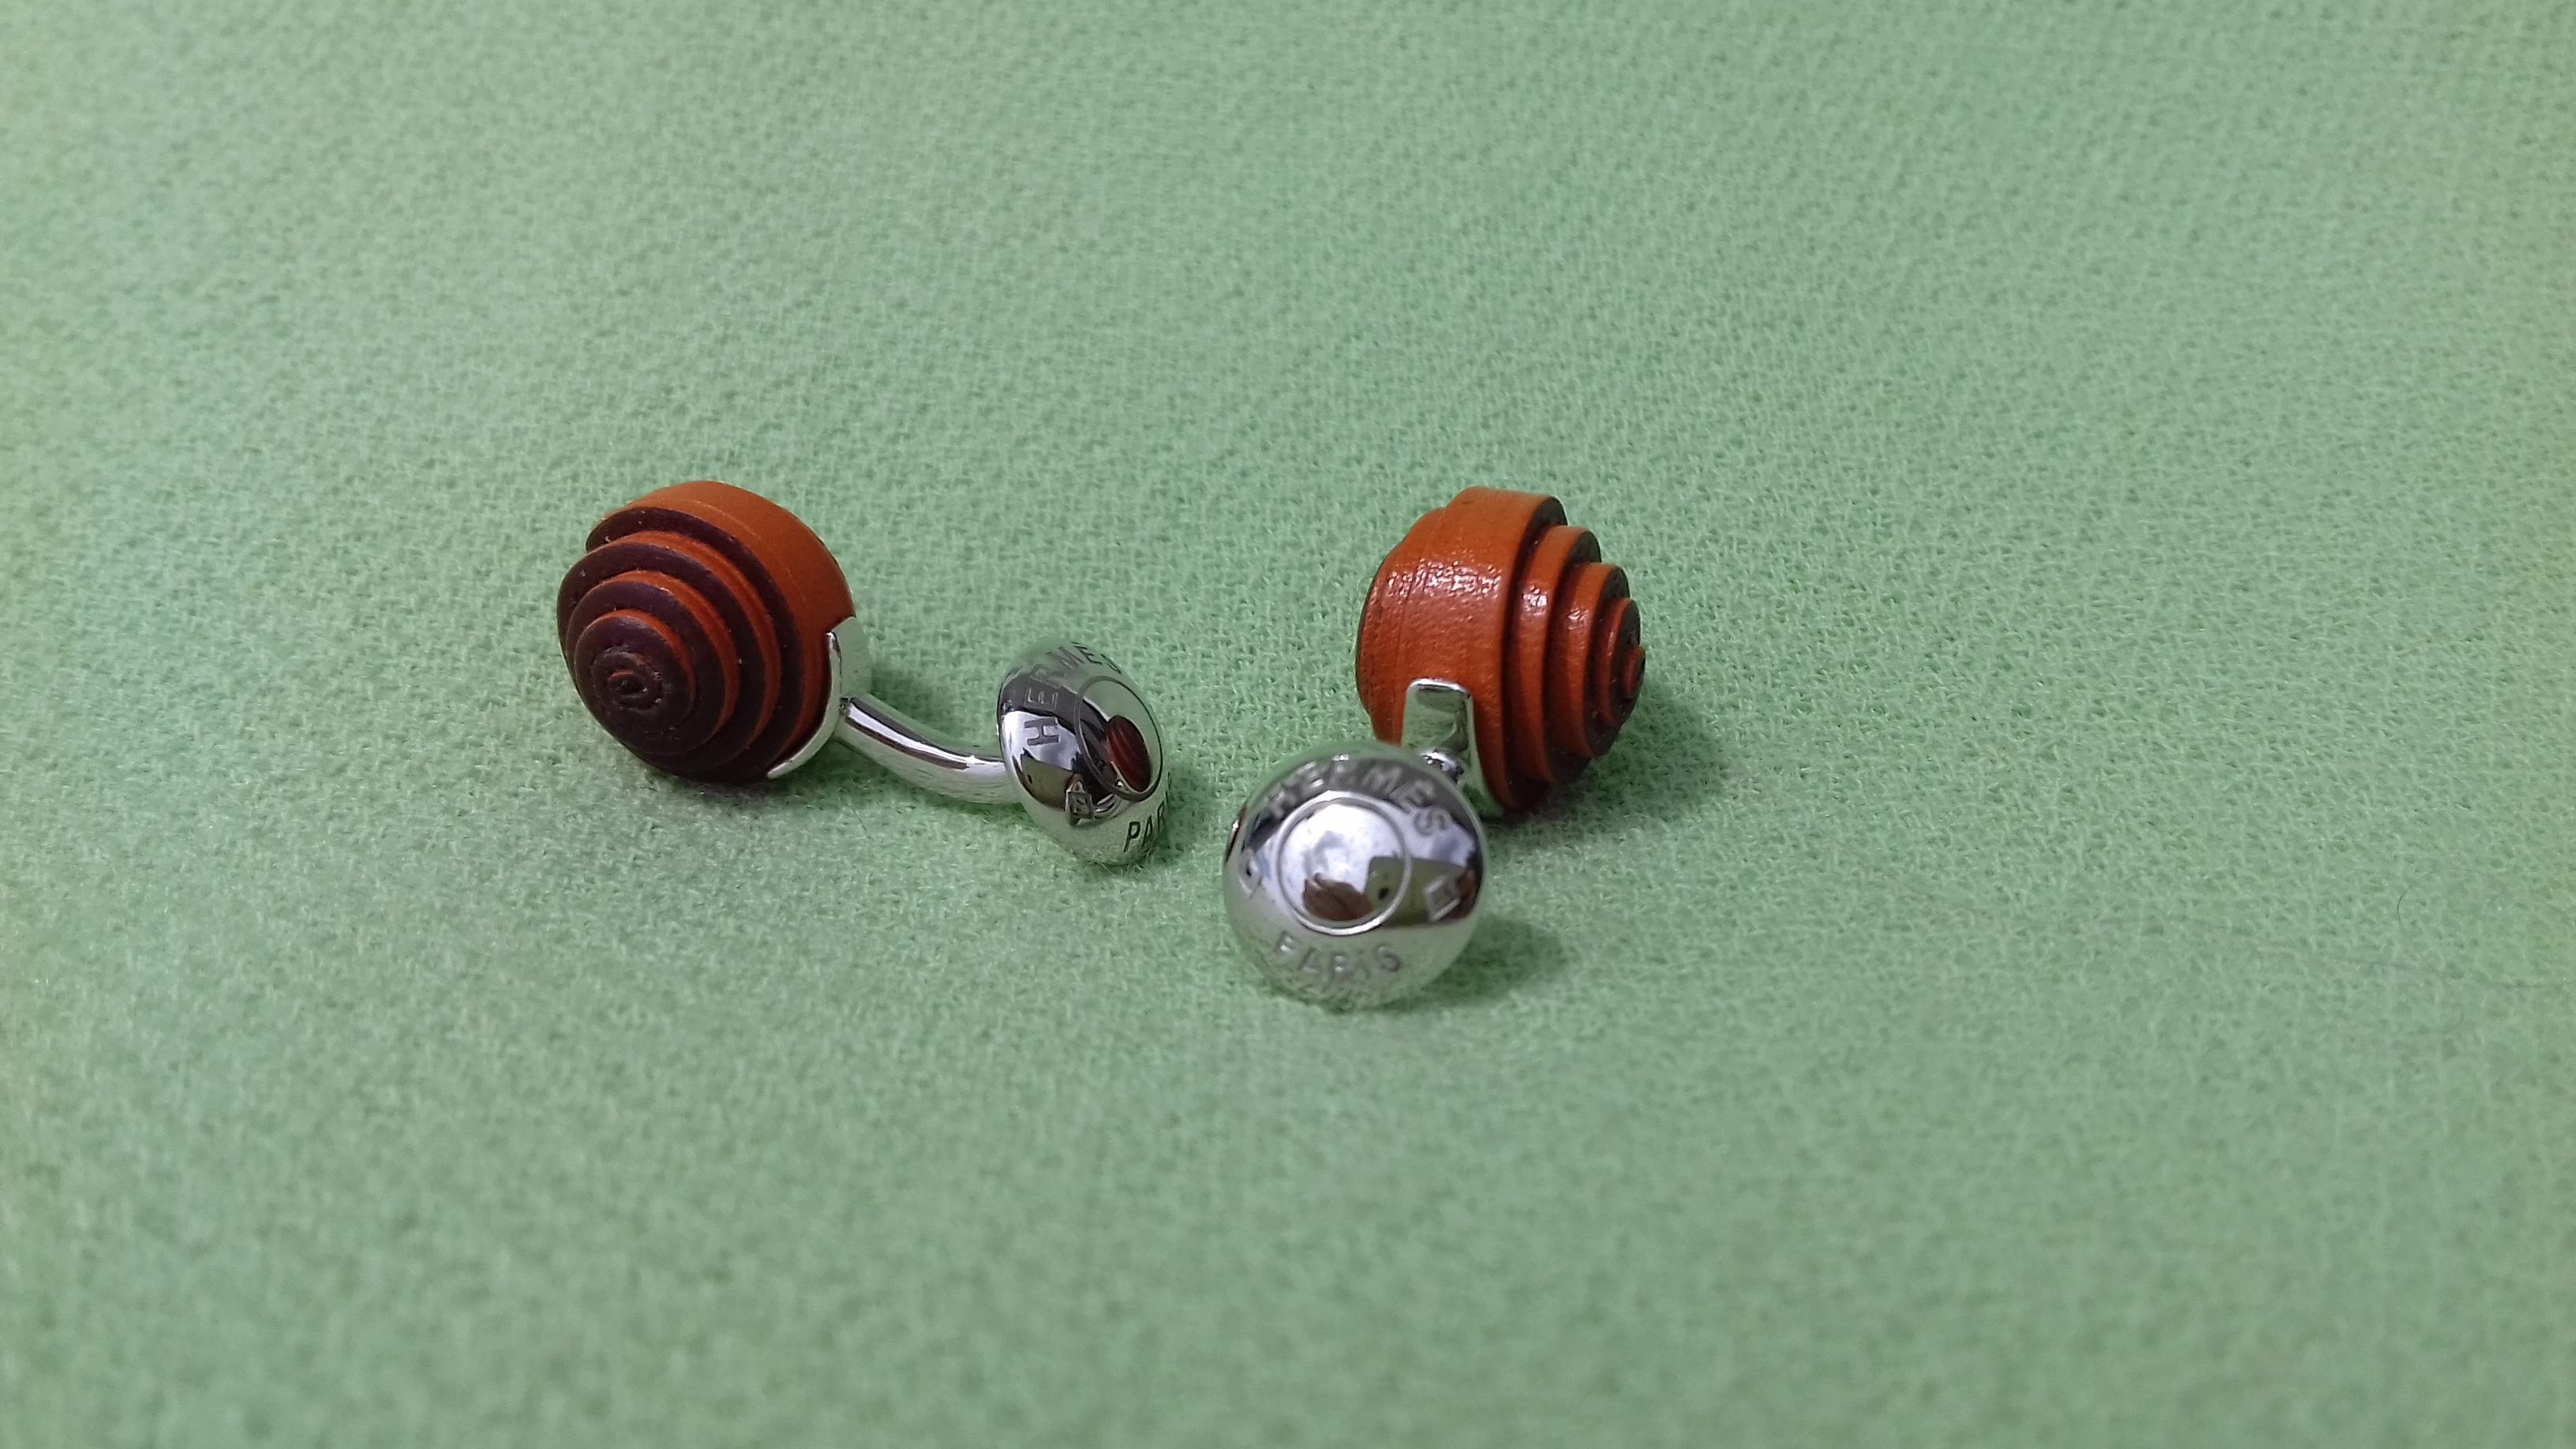 Beautiful Authentic Hermès Cufflinks

In cute Snails Shape

Made of Stering Silver (Ag925) and Leather

Colorway: Silver and Orange

